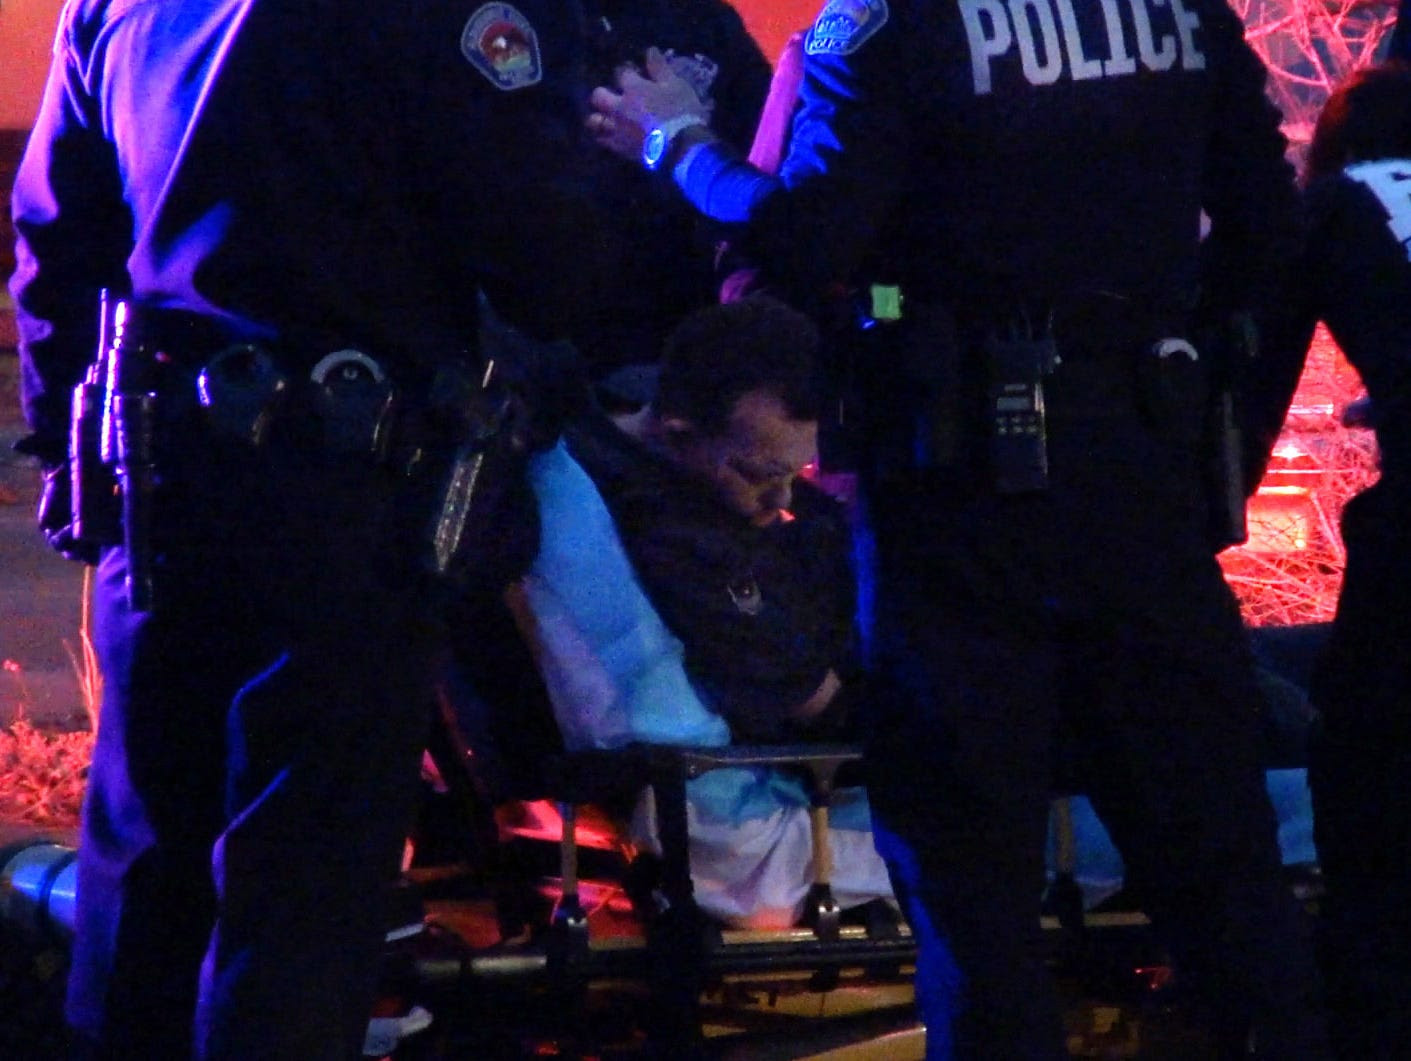 In this frame grab taken from video, medical personal assist a man before transporting him to an ambulance in Albuquerque, N.M., Tuesday, Jan. 13, 2015.